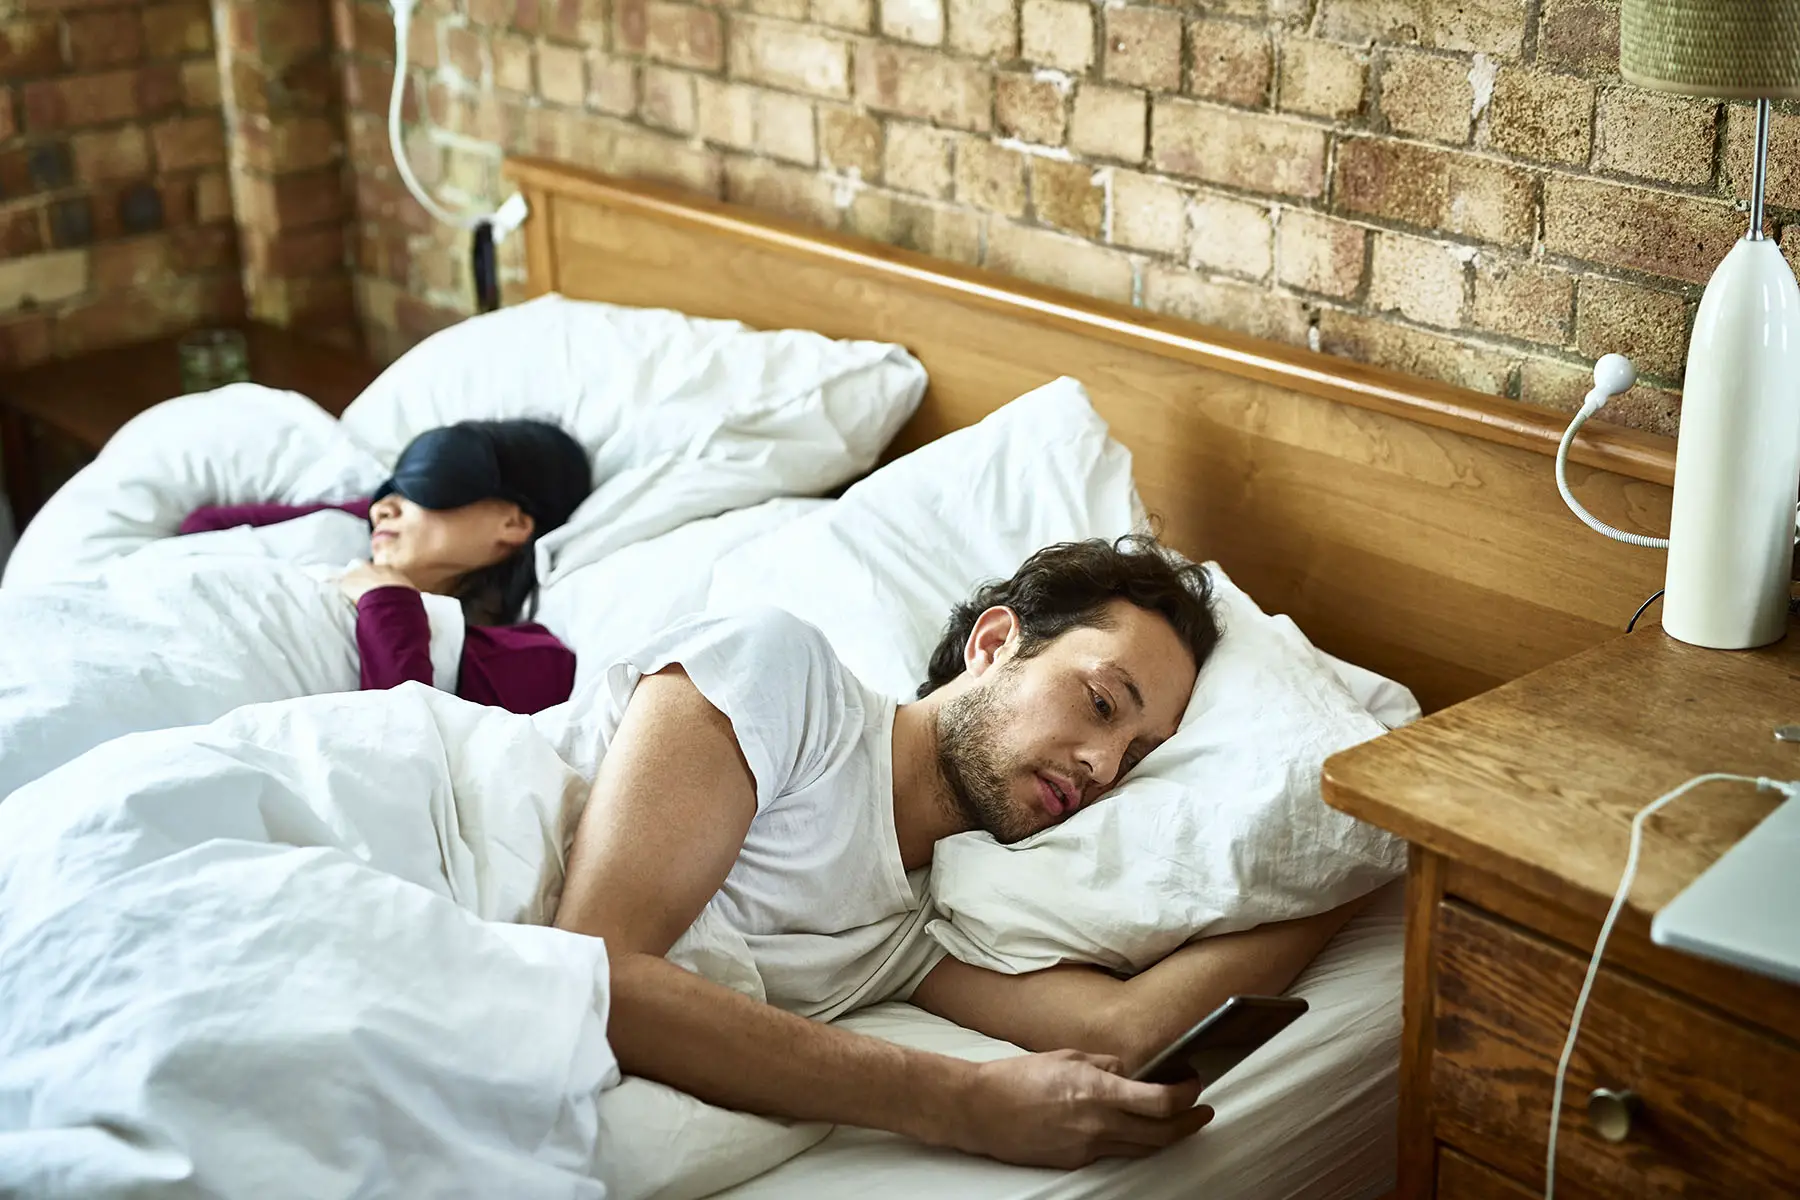 Man looking at his phone while his wife is sleeping next to him in the bed.